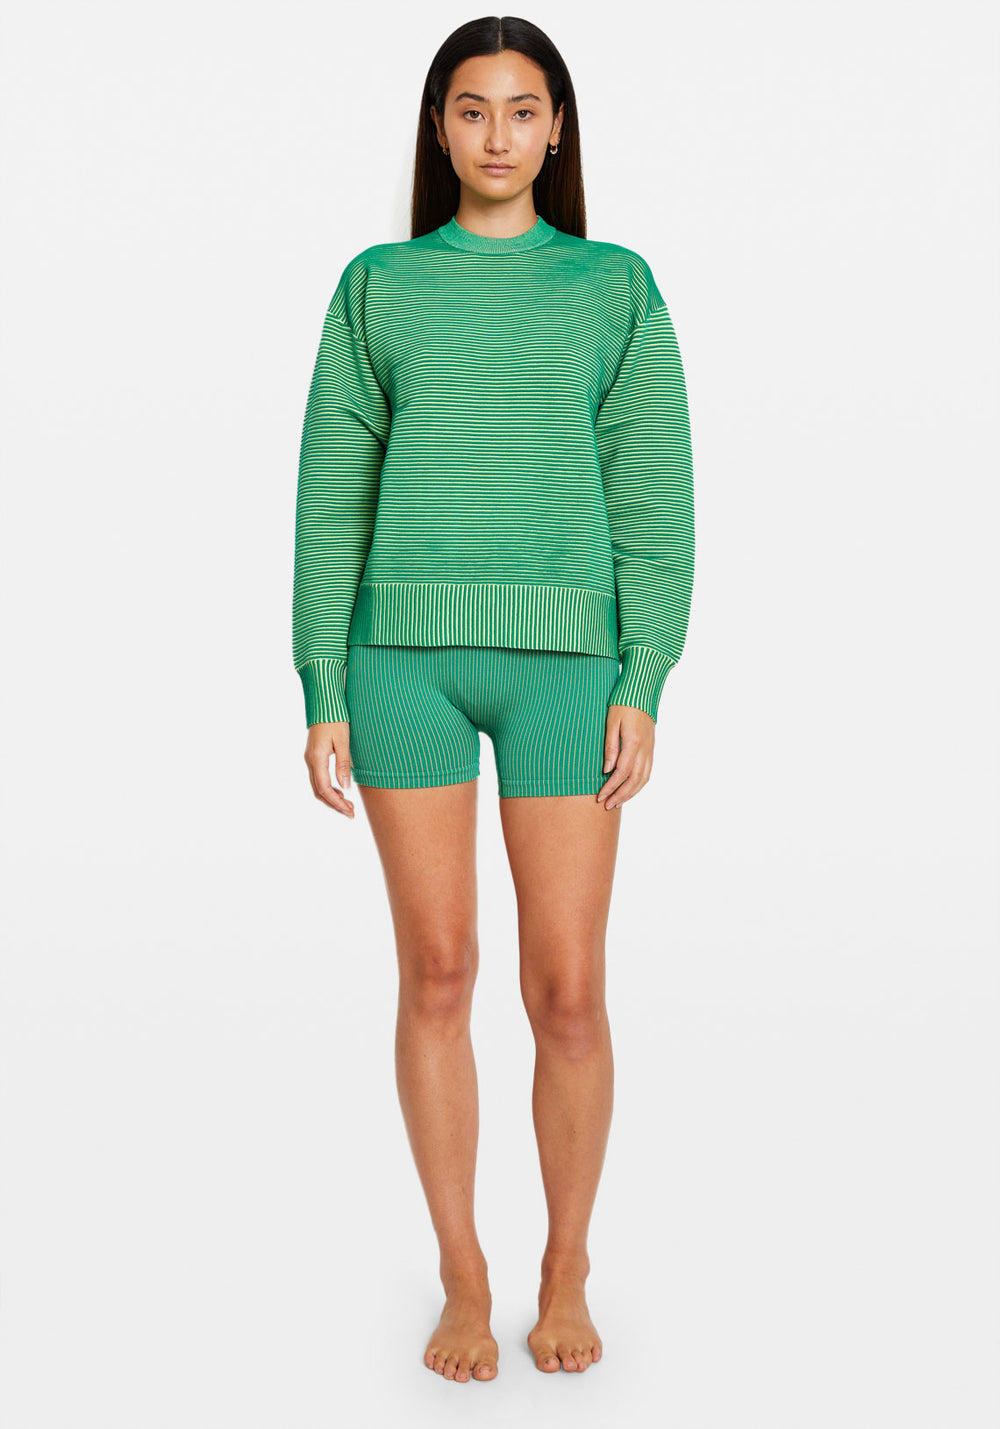 SONNY CREW NECK SWEATER TROPIC GREEN/LIME